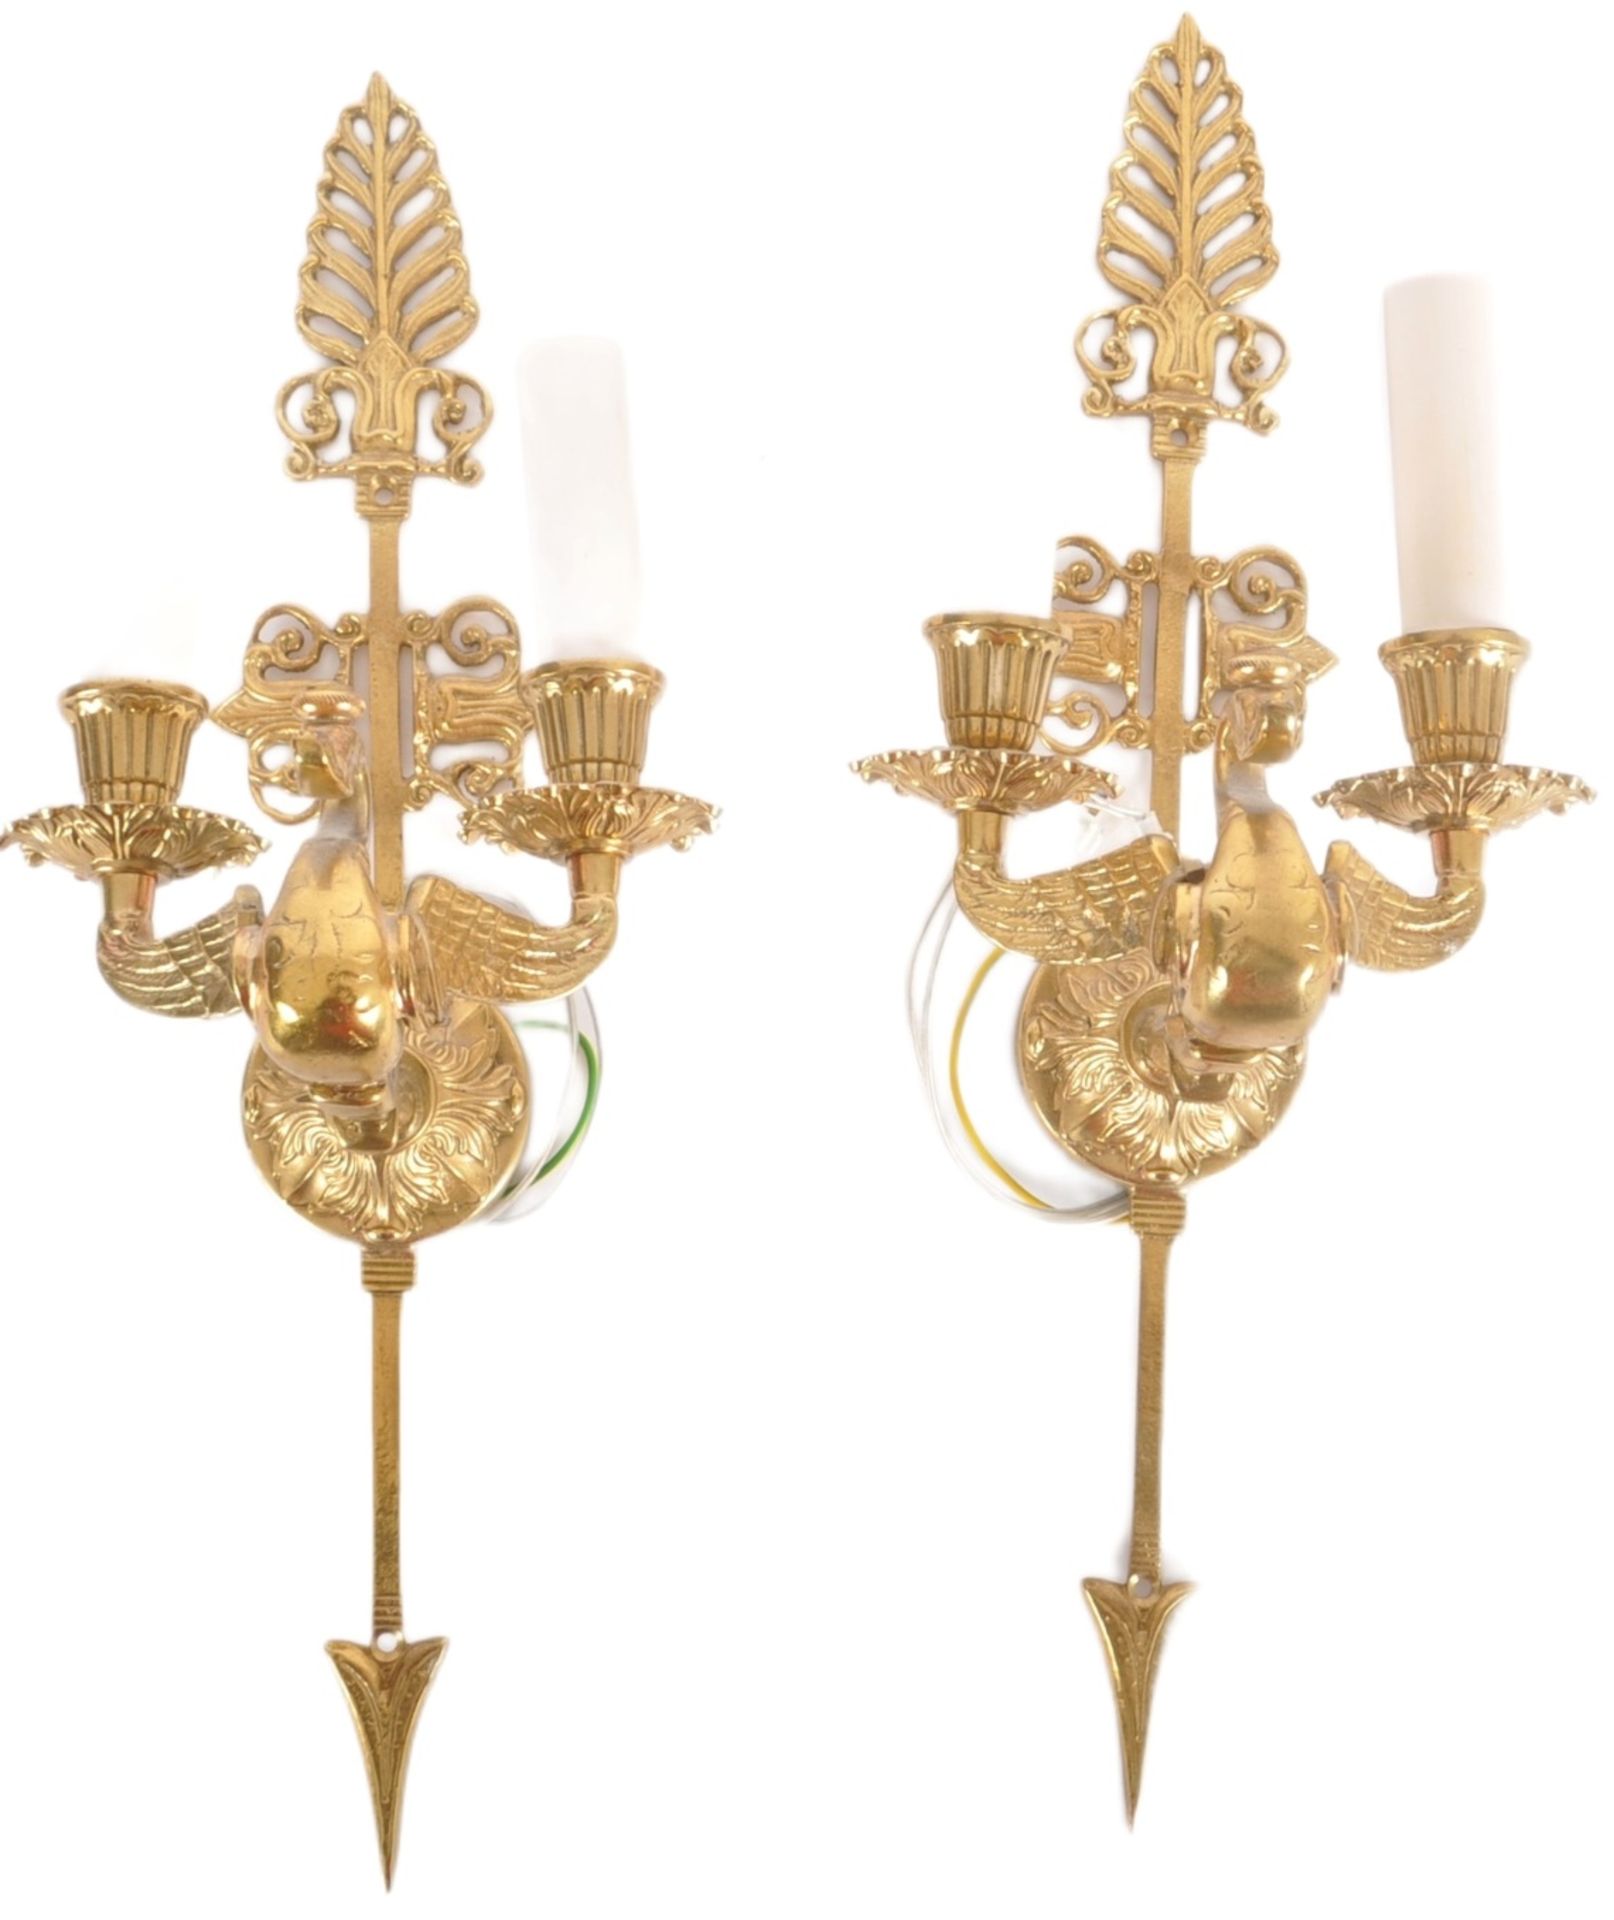 SUITE OF ANTIQUE REVIVAL GILT METAL LIGHTING - Image 10 of 13